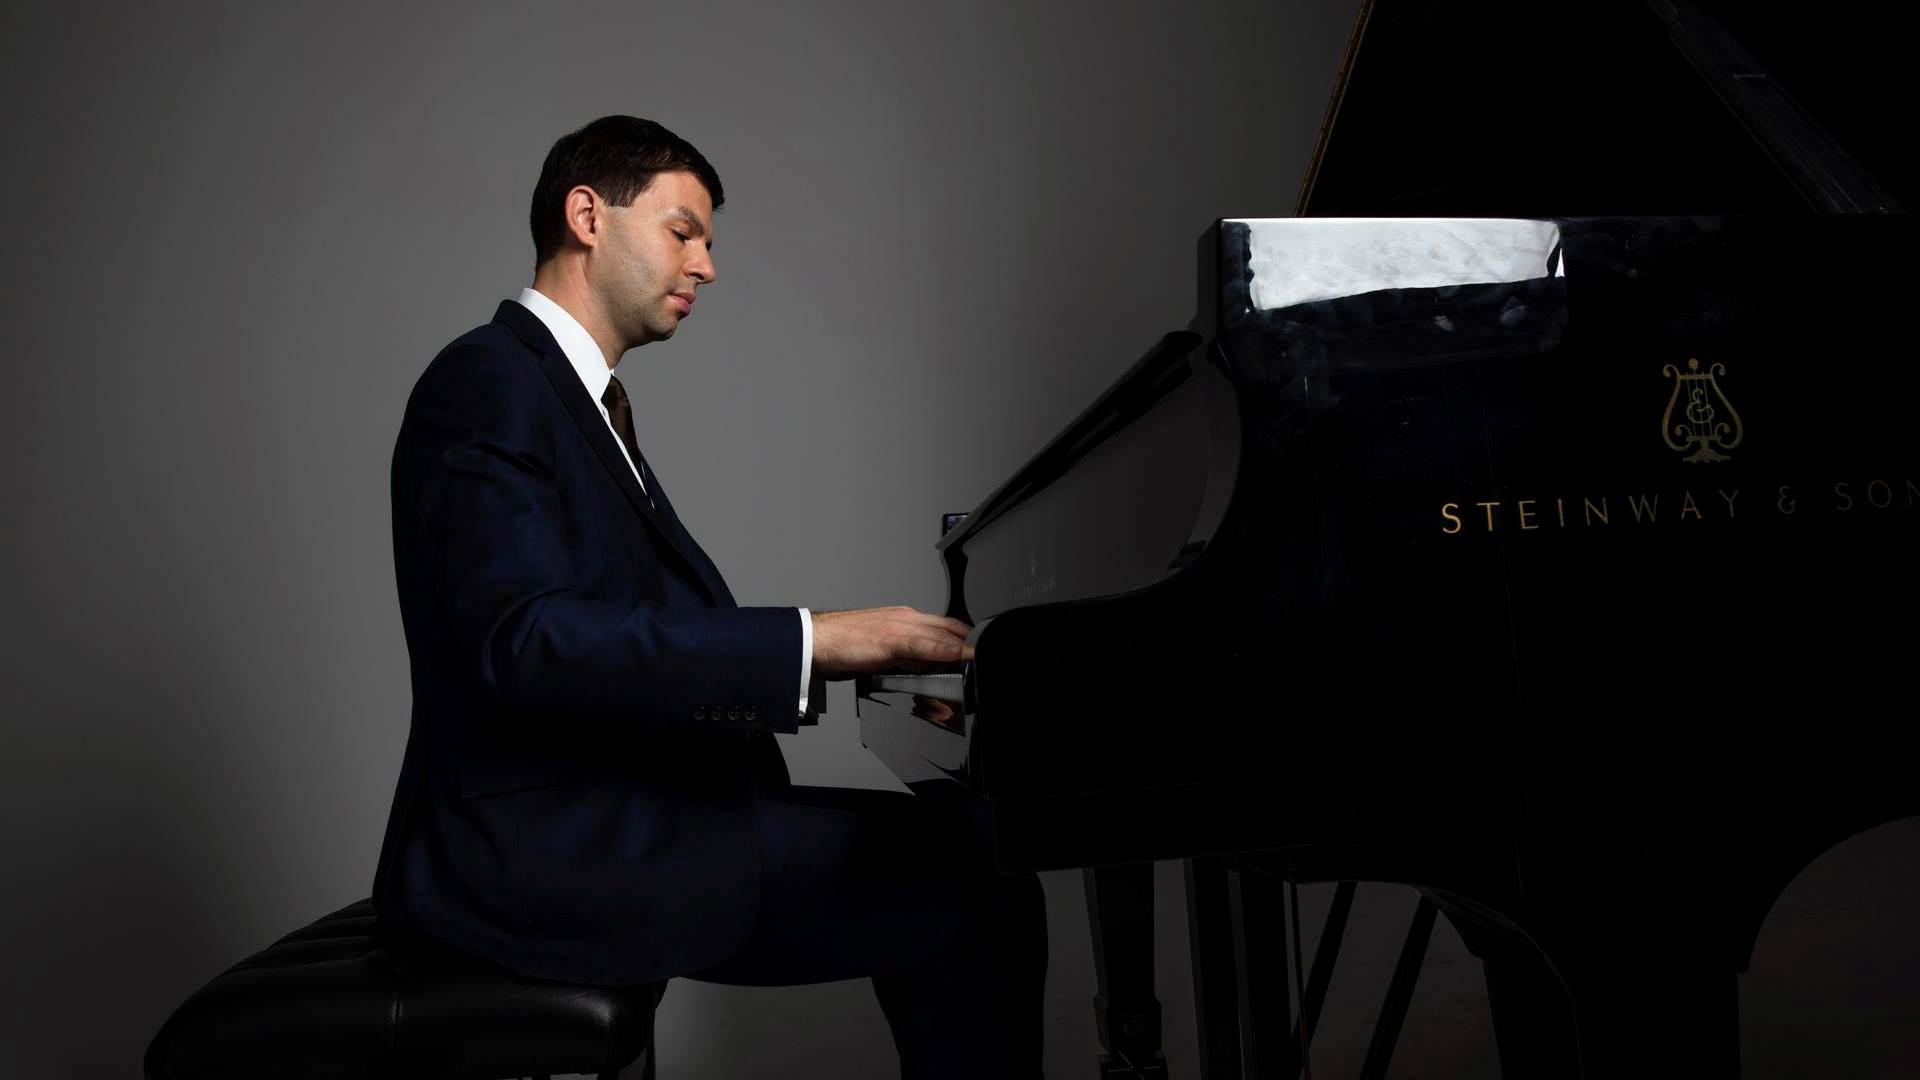 A man with medium complexion and dark hair in a blue suit playing a black grand piano against a grey background.